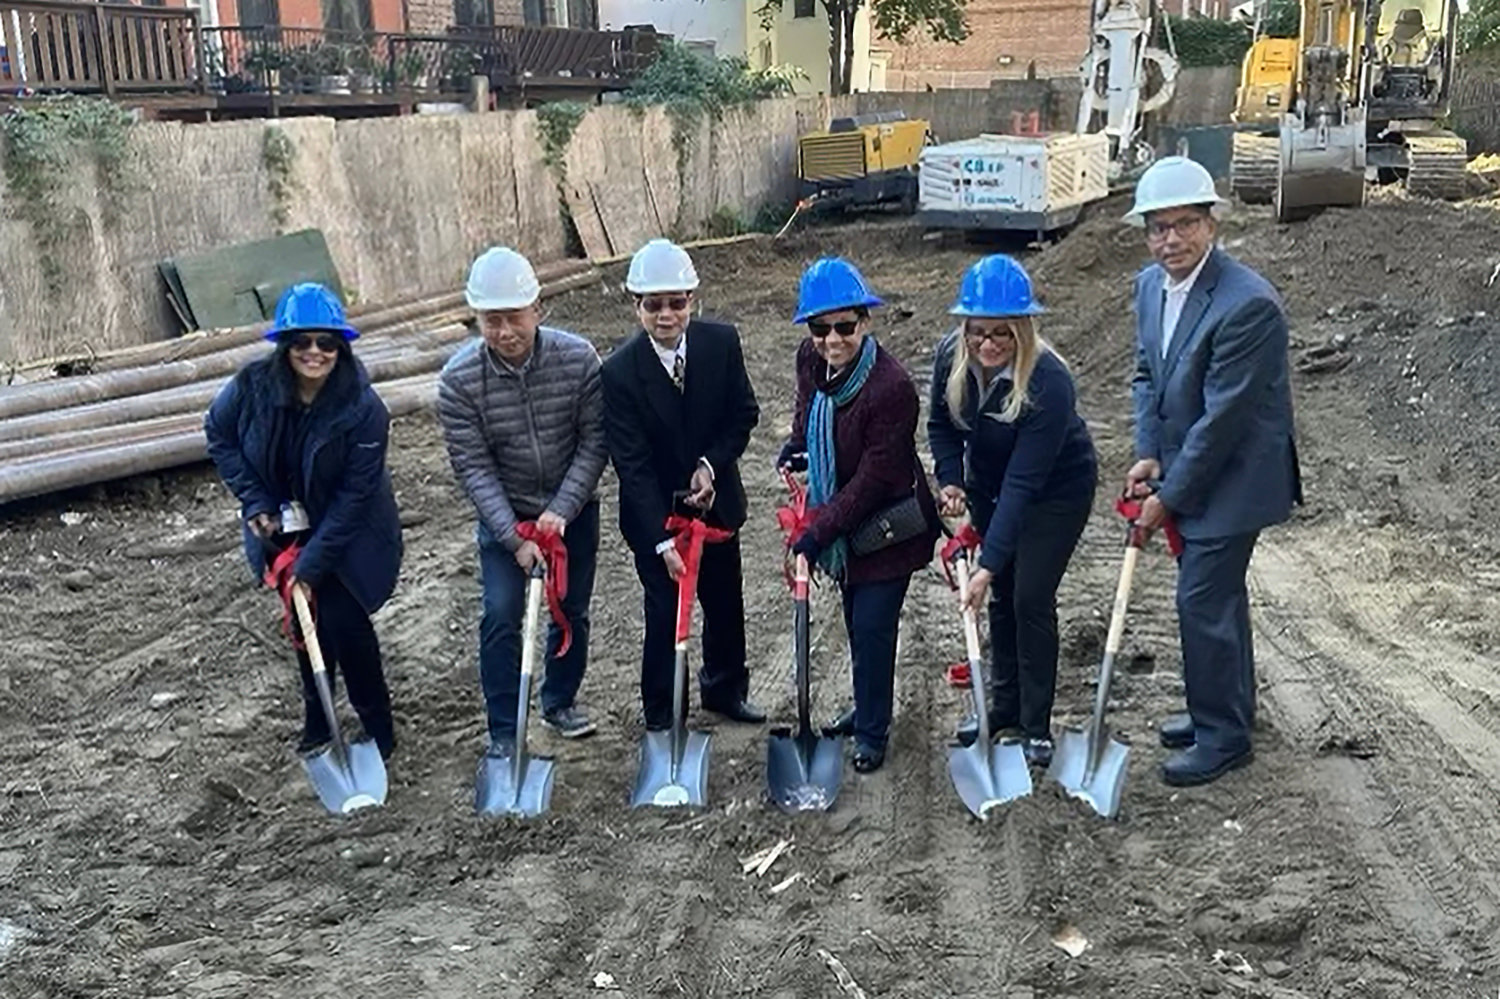 Members of the International Leadership Charter School administration and the developer break ground in a ceremony recently where a new middle school is being built.